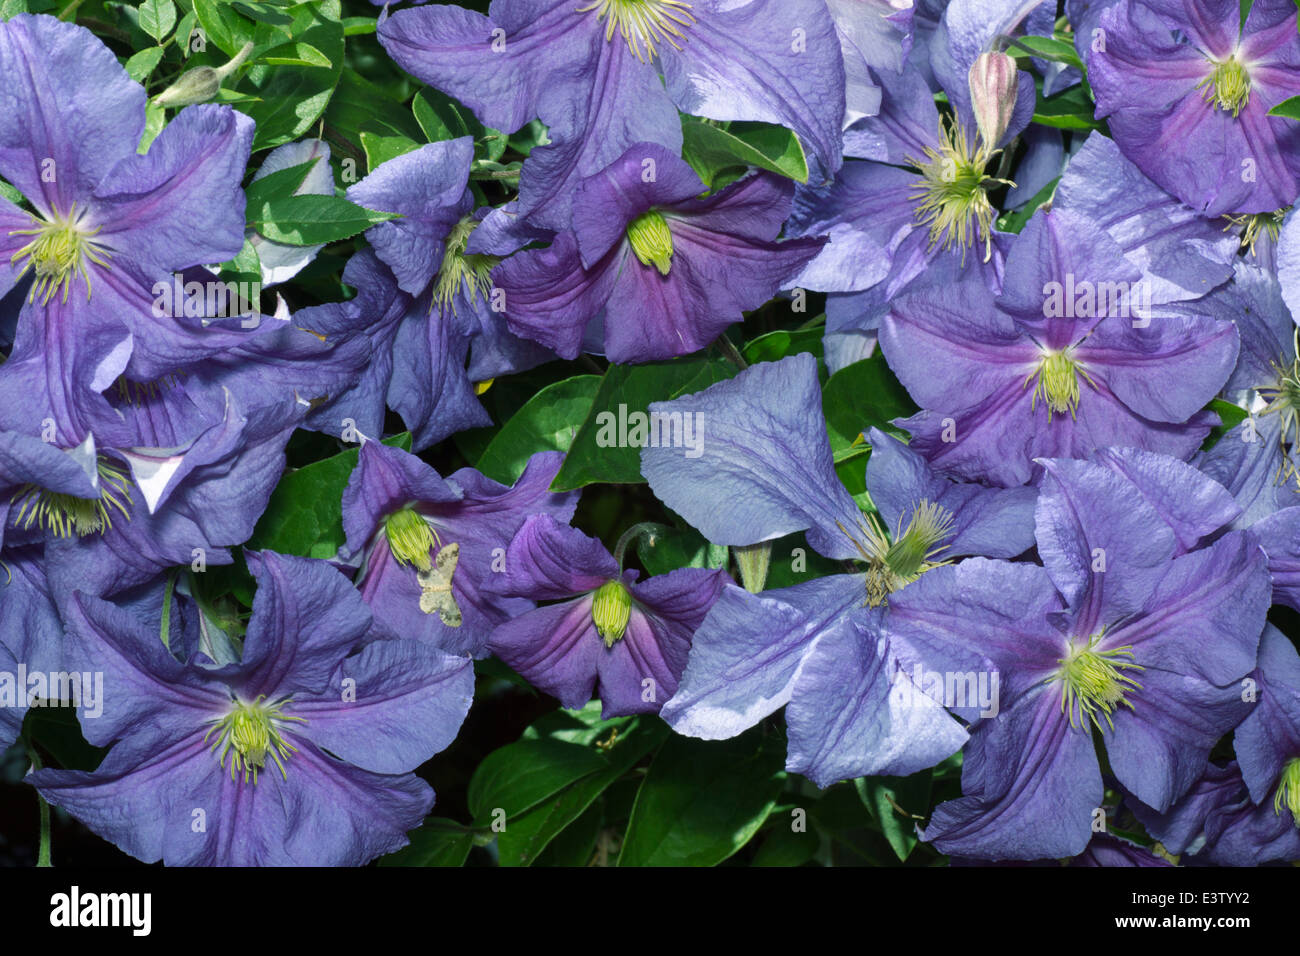 Flowers of the summer flowering climber, Clematis 'Perle d'azur' Stock Photo